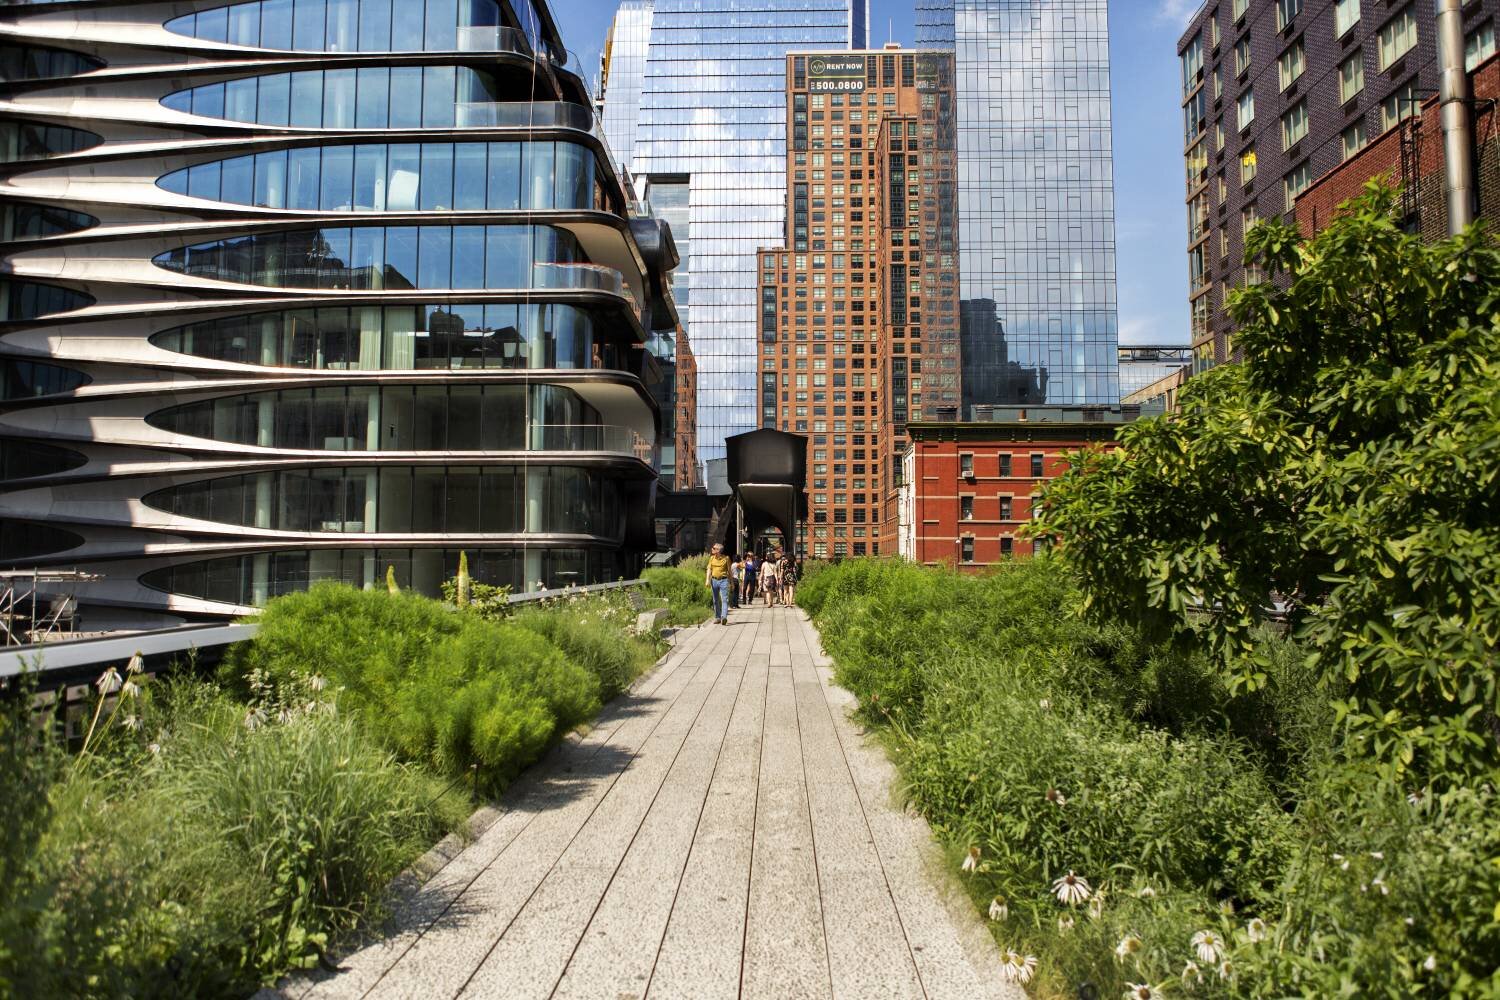 The Highline view of Zaha Hadid building